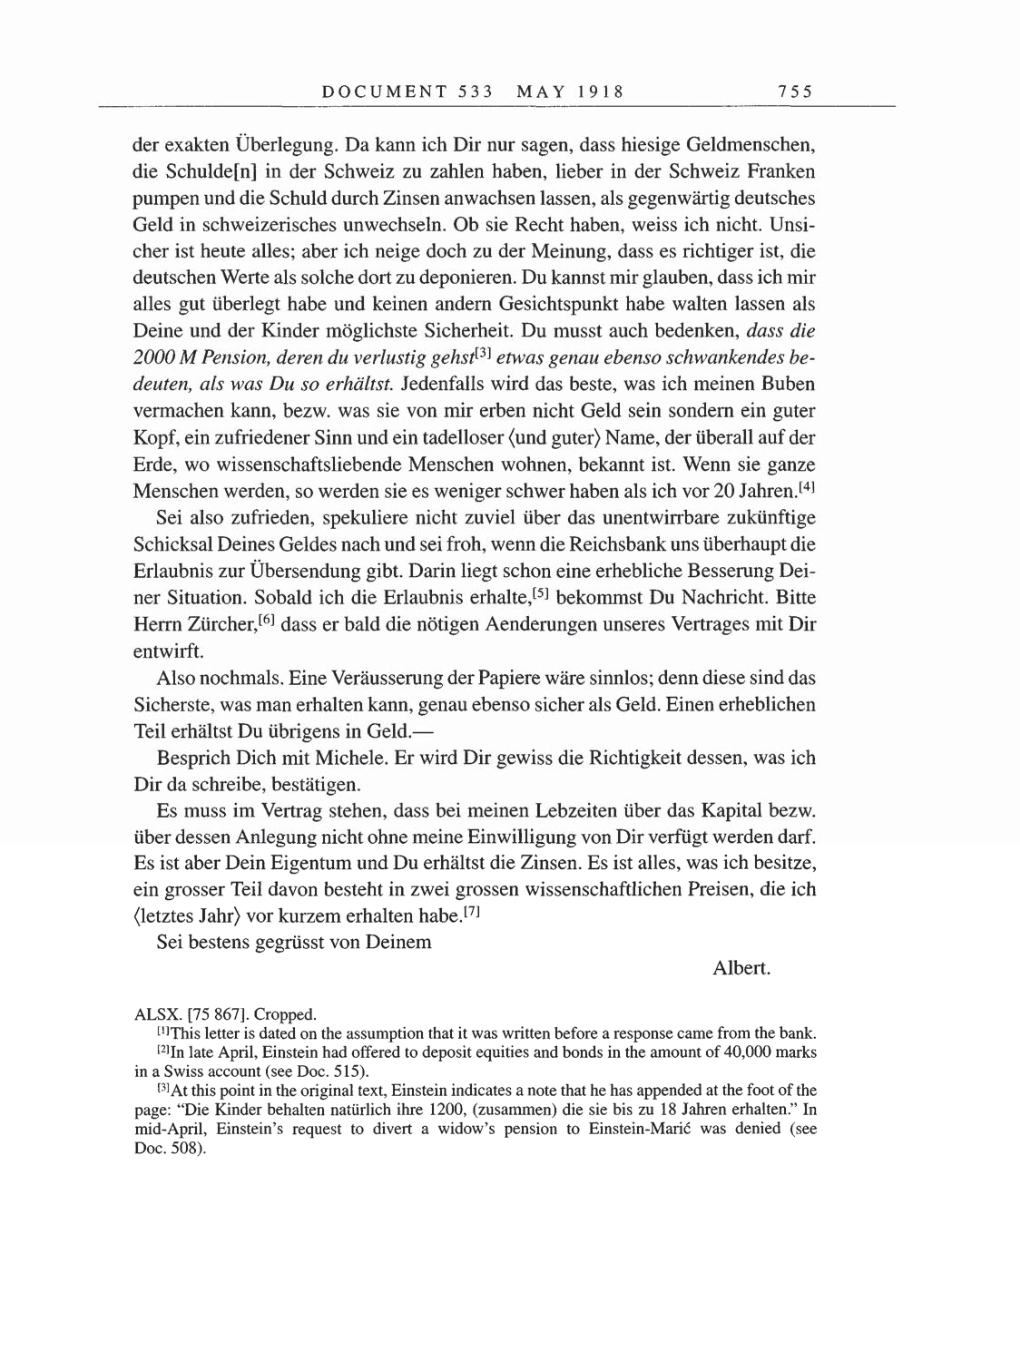 Volume 8, Part B: The Berlin Years: Correspondence 1918 page 755